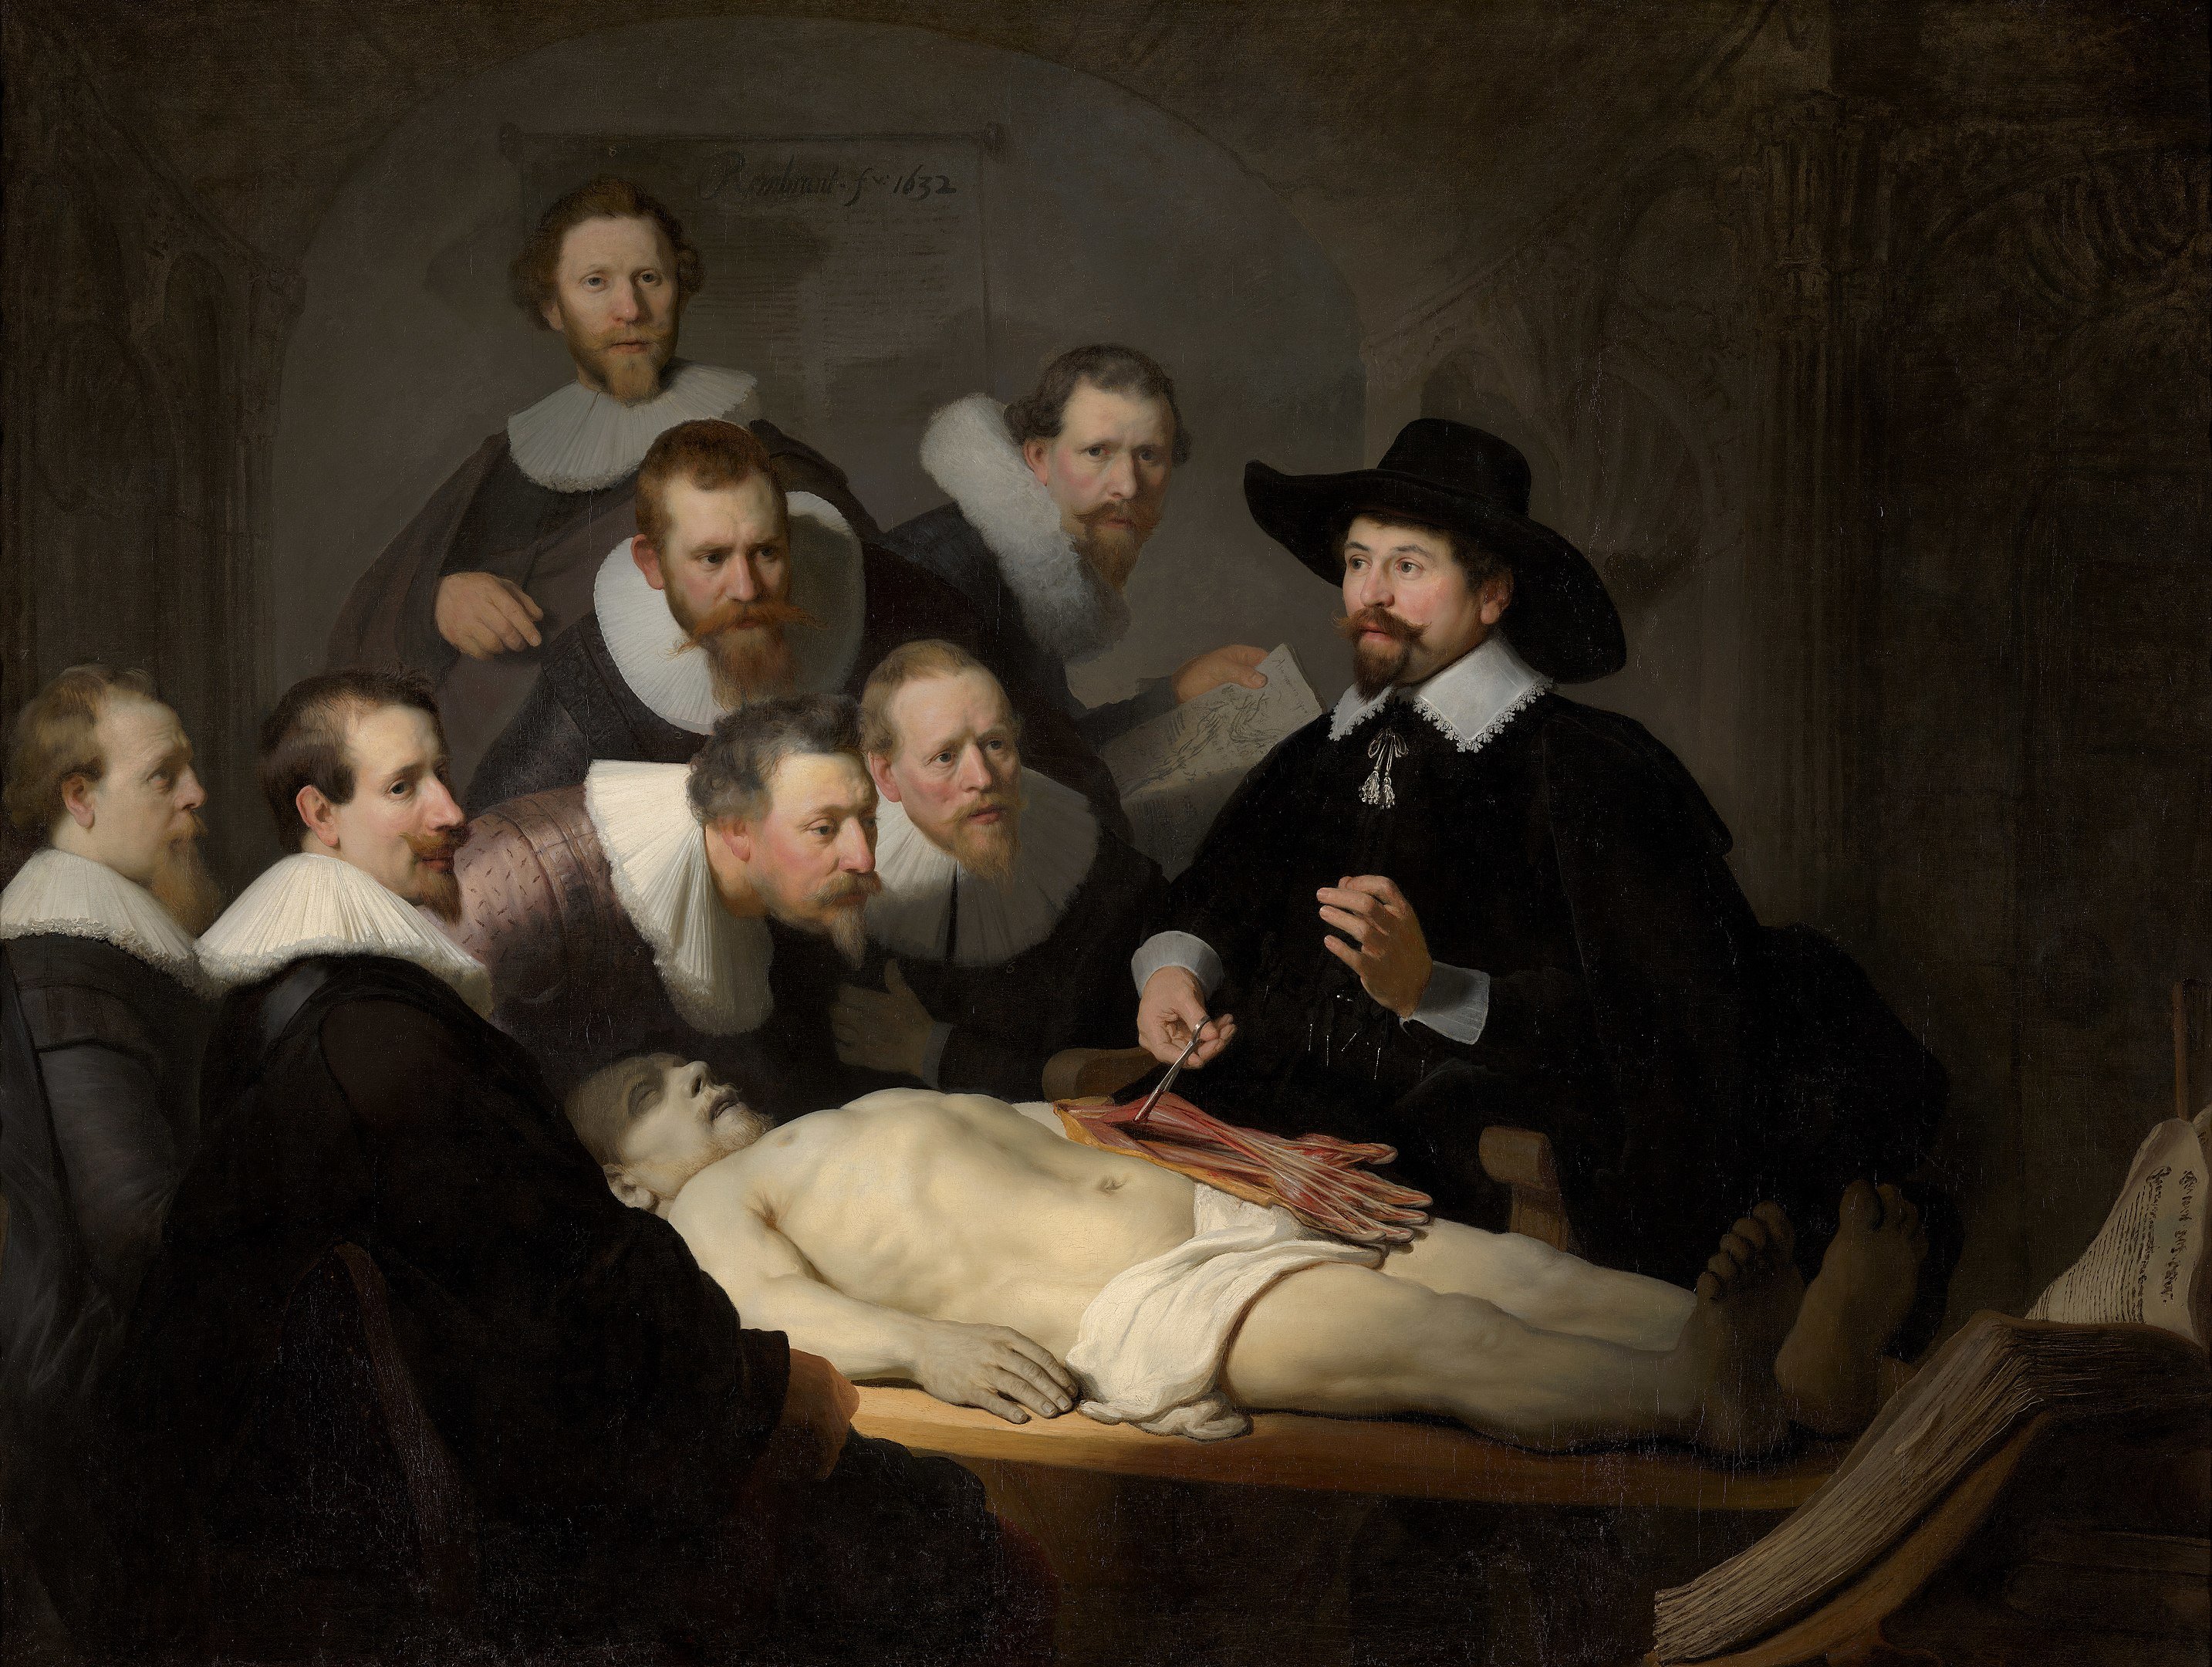 Rembrandt - The Anatomy Lesson of Dr Nicolaes Tulp